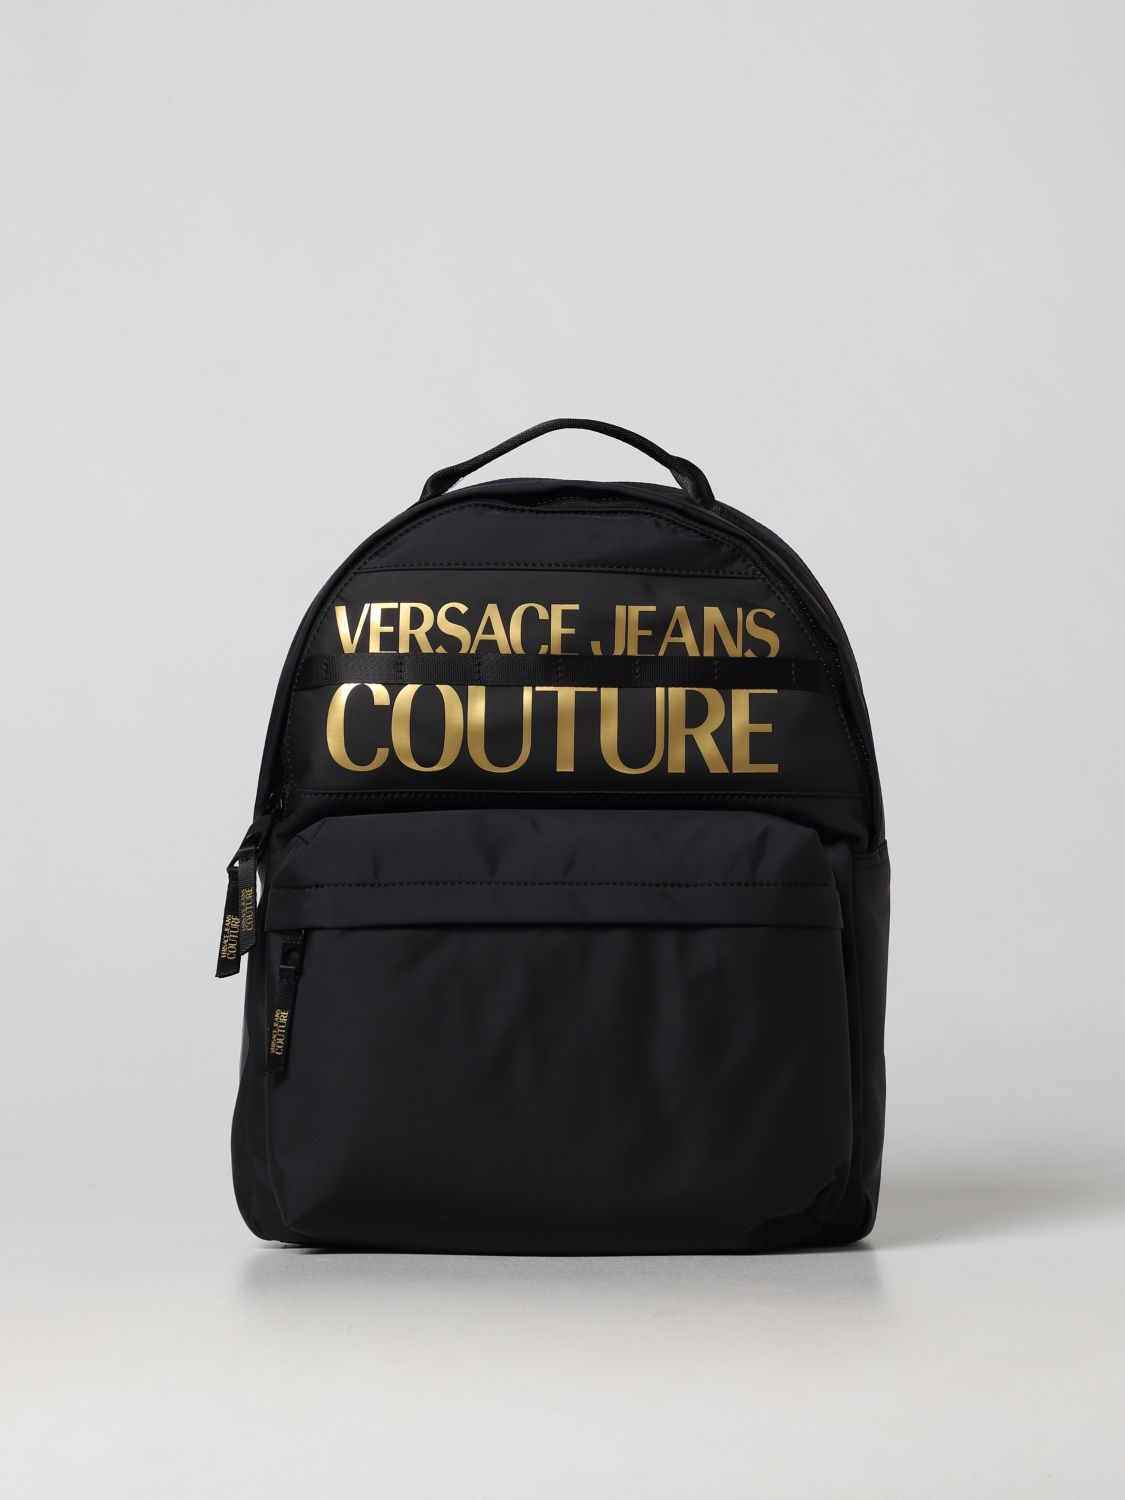 Рюкзак Versace Jeans Couture: Рюкзак Versace Jeans Couture для него черный 1